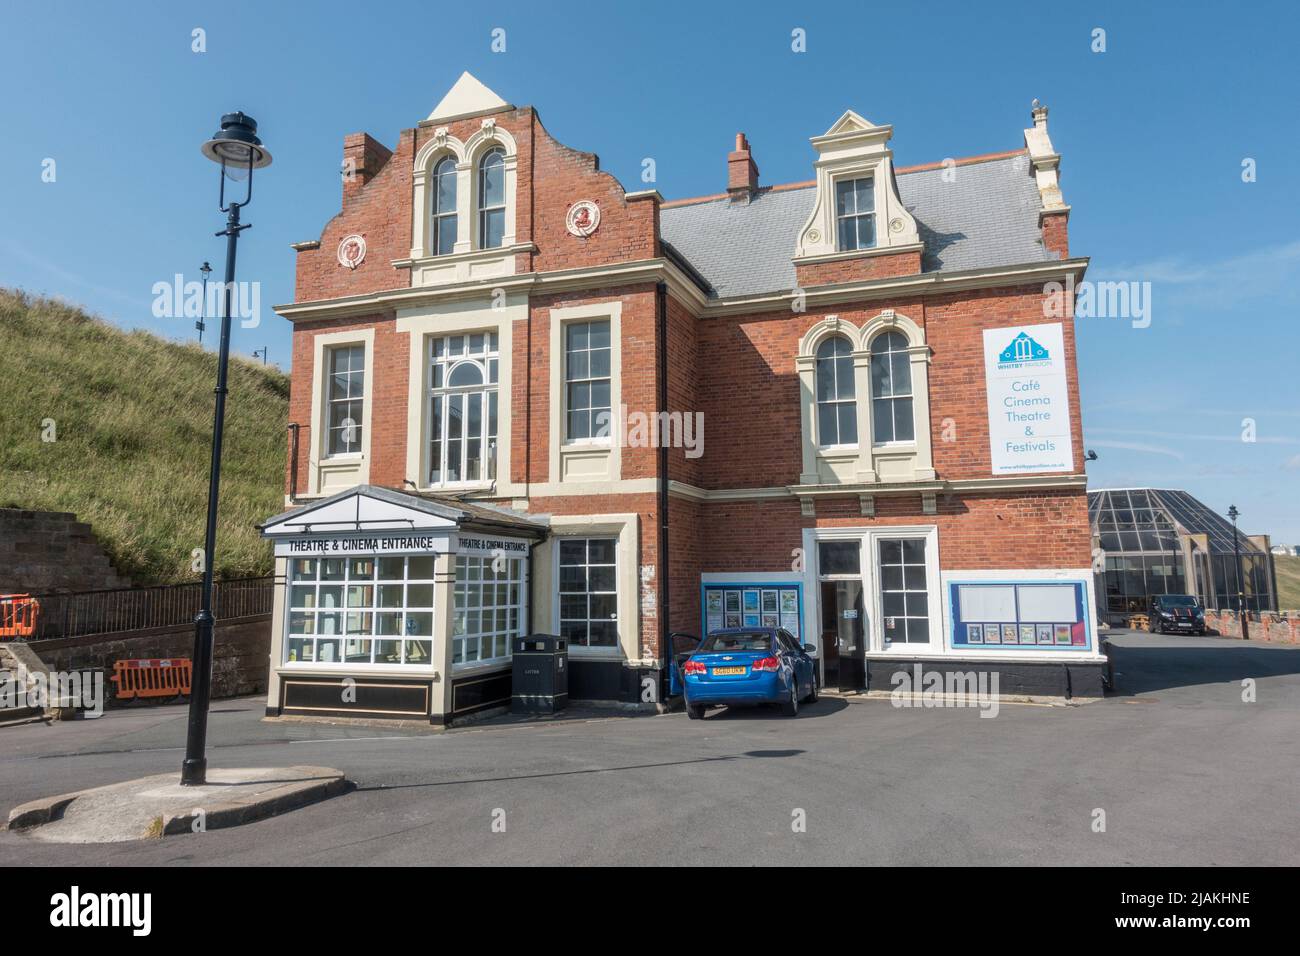 Whitby Pavilion (cafe, cinema and theatre) in Whitby, North Yorkshire, England. Stock Photo